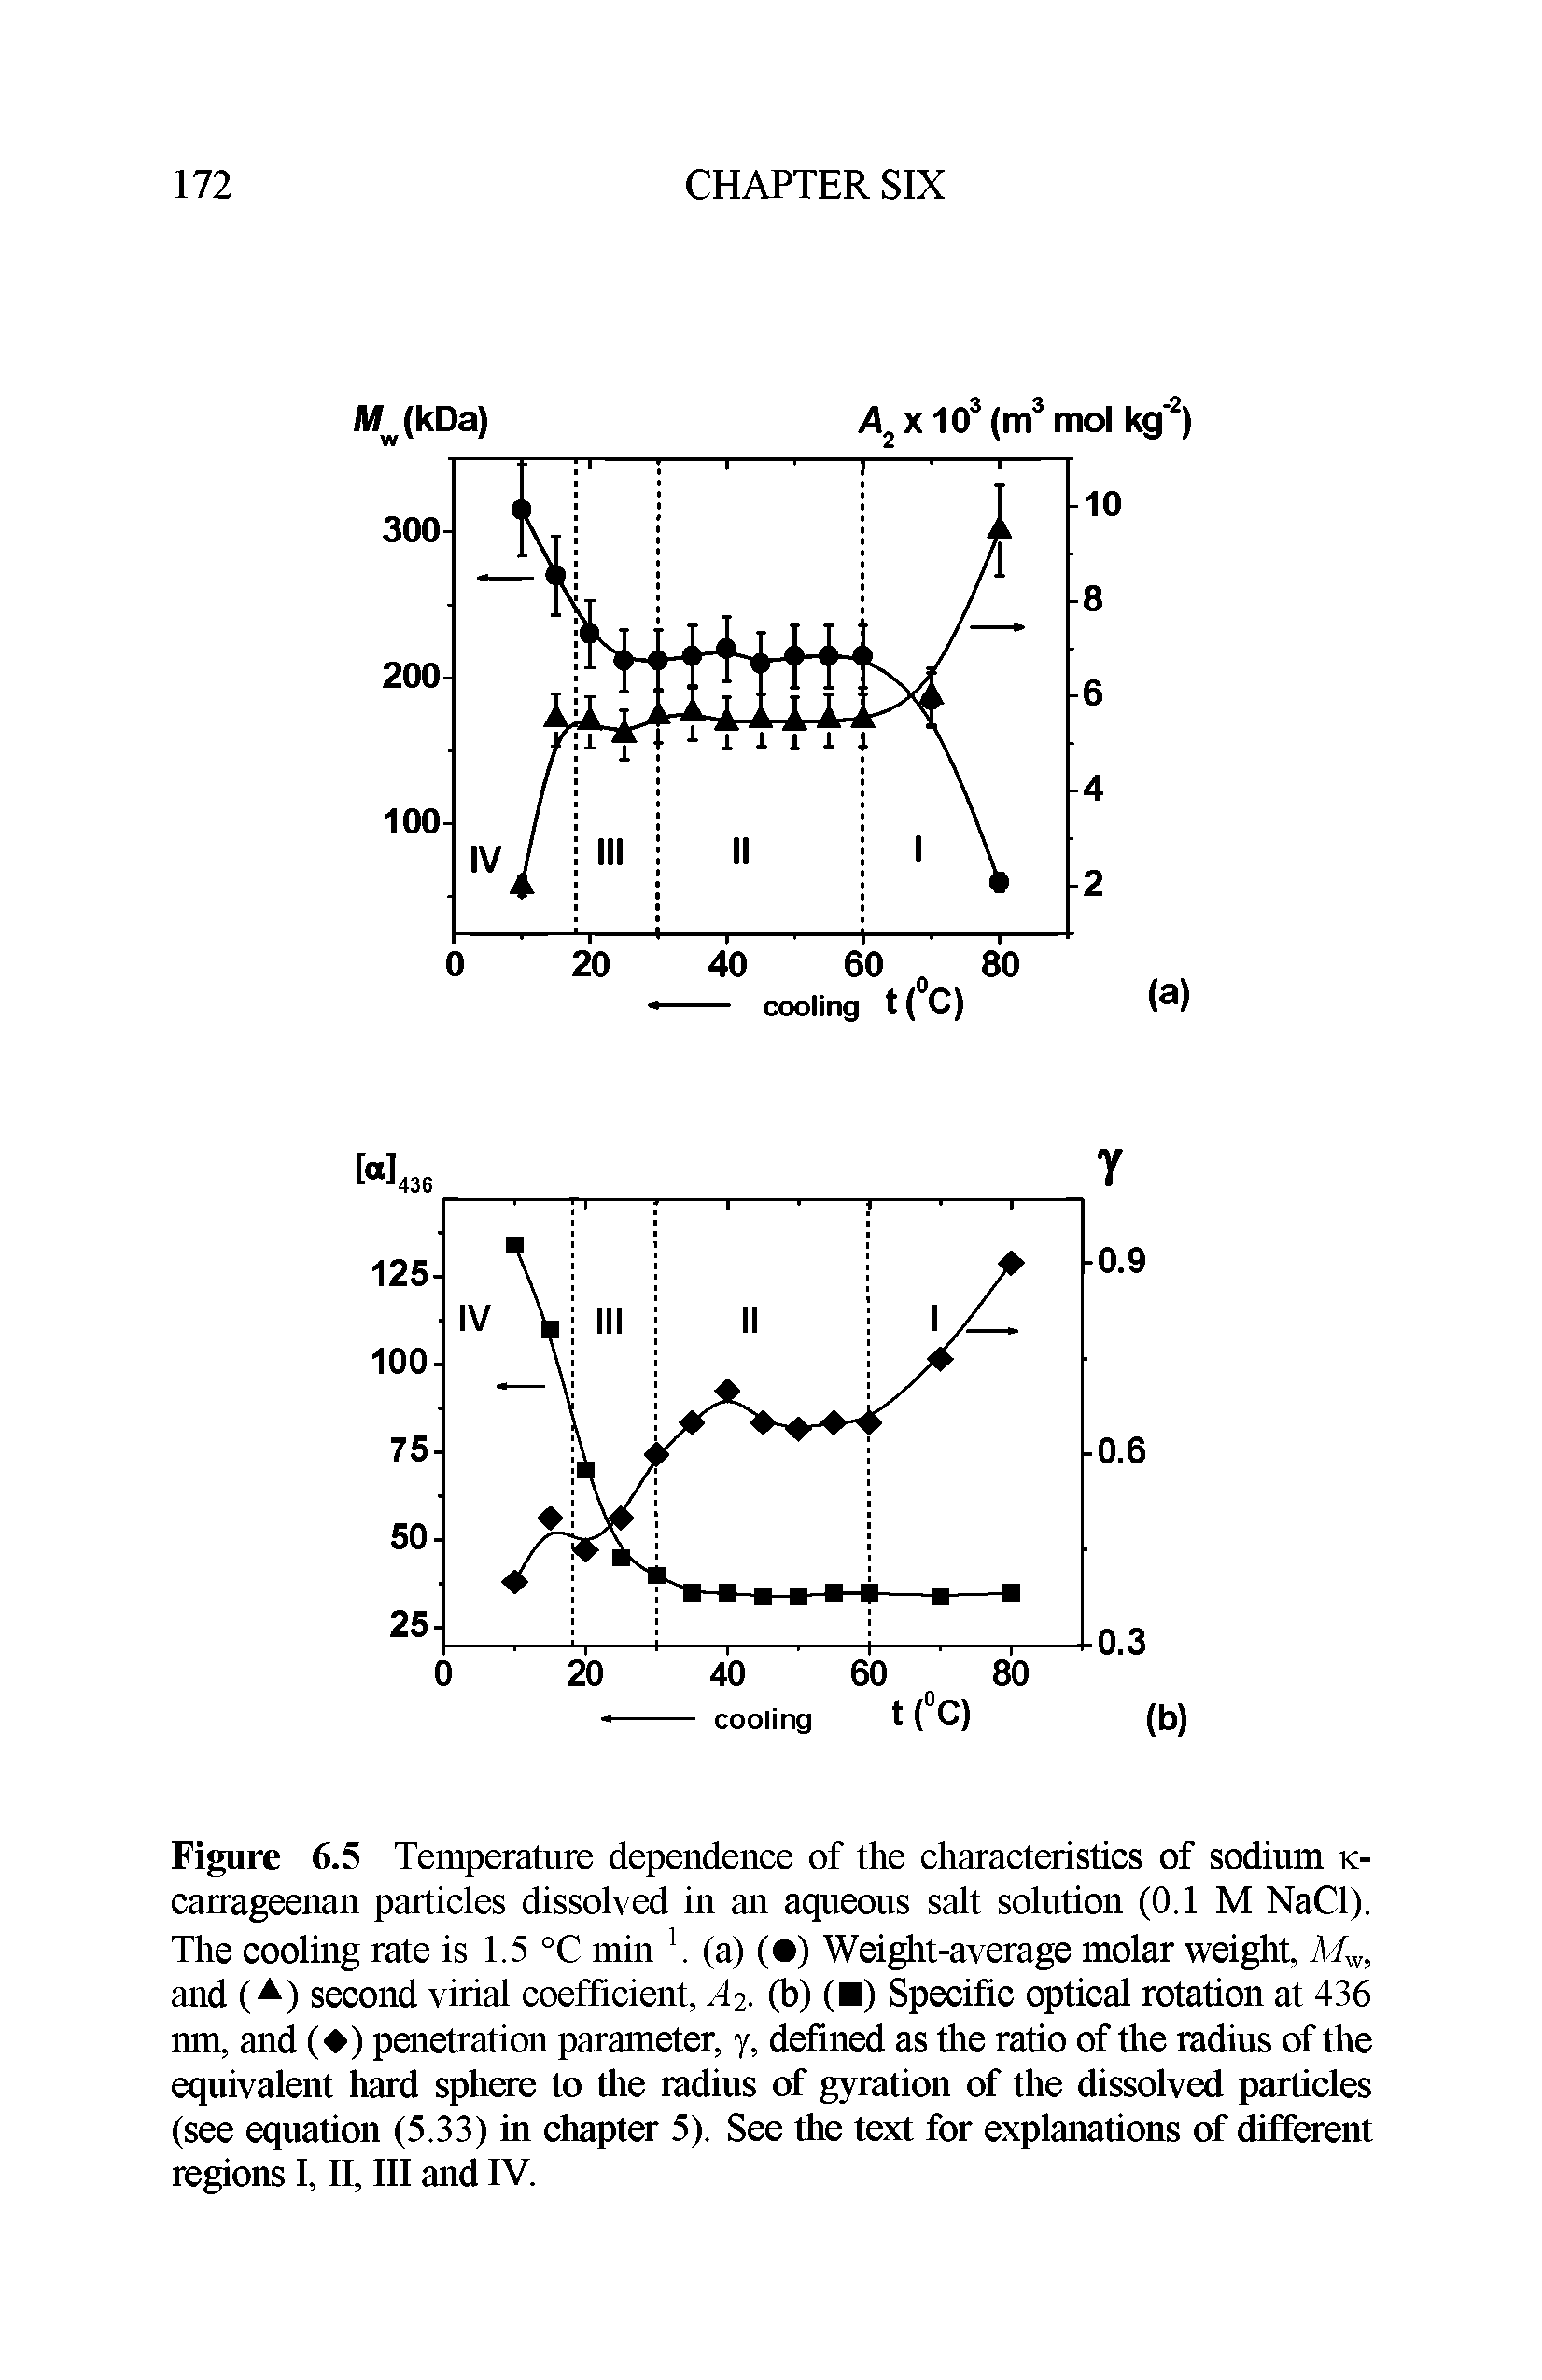 Figure 6.5 Temperature dependence of the characteristics of sodium k-carrageenan particles dissolved in an aqueous salt solution (0.1 M NaCl). The cooling rate is 1.5 °C min-1, (a) ( ) Weight-average molar weight, Mw, and (A) second virial coefficient, A2. (b) ( ) Specific optical rotation at 436 nm, and ( ) penetration parameter, y, defined as tlie ratio of the radius of the equivalent hard sphere to the radius of gyration of the dissolved particles (see equation (5.33) in chapter 5). See the text for explanations of different regions I, II, III and IV.